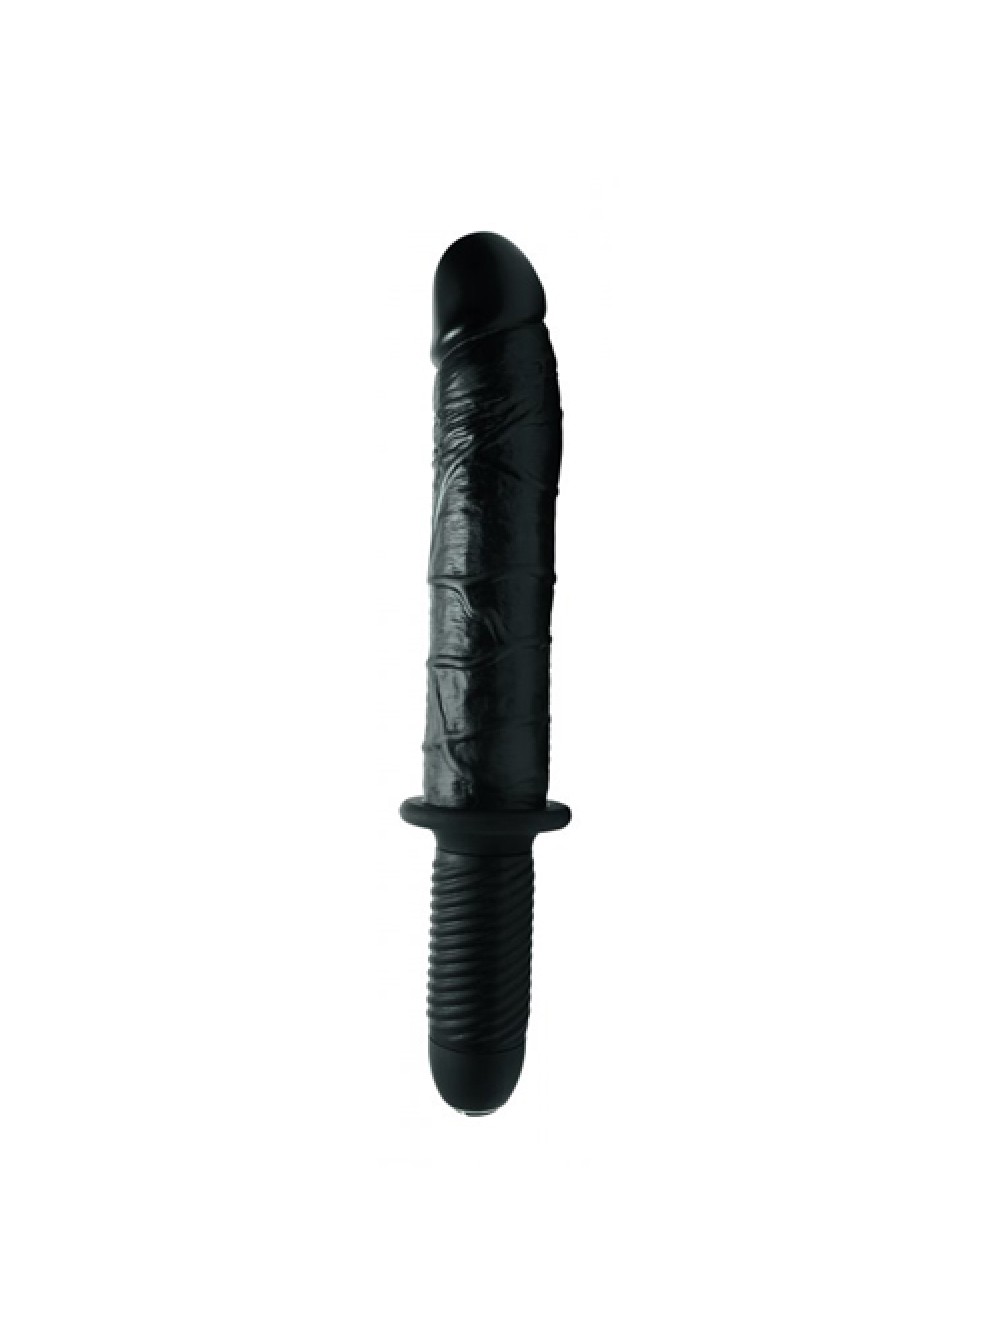 Enormass Vibrator With Handle